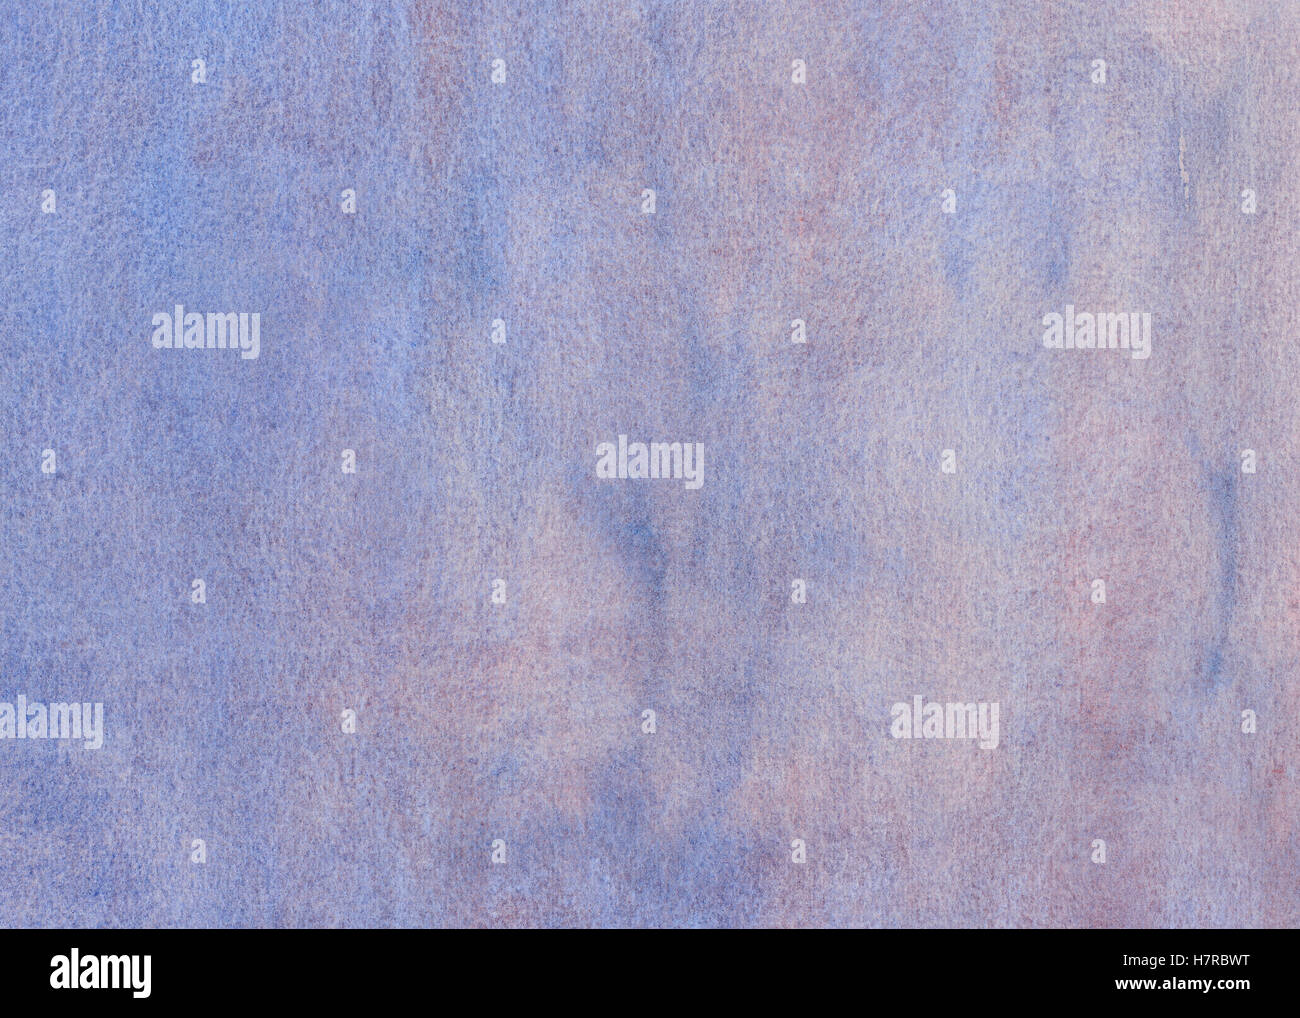 Blue abstract watercolor background, brush painted Stock Photo